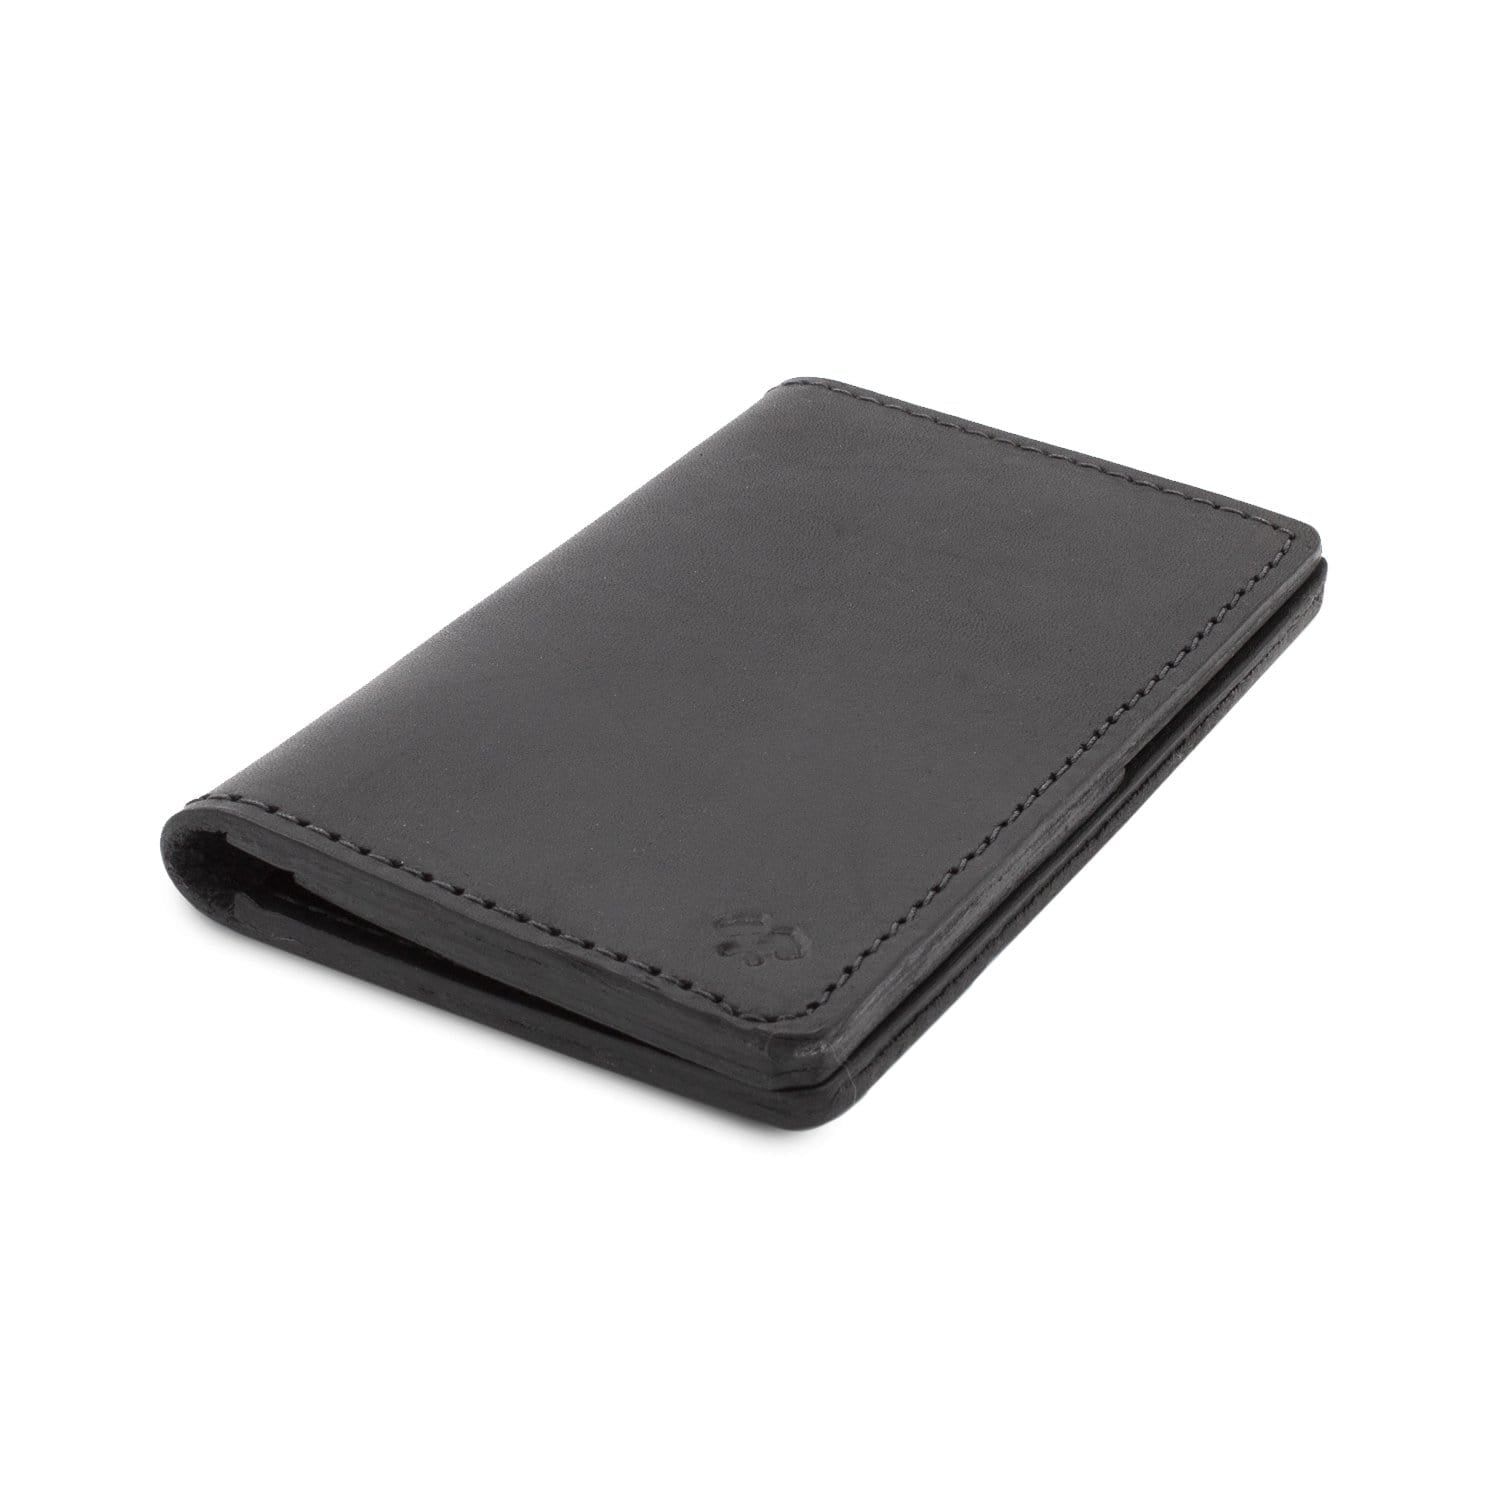 Black Passport holder for Men, Men's Eco Leather cover for Documents,  Stylish designer case Travel Accessories : Handmade Products 